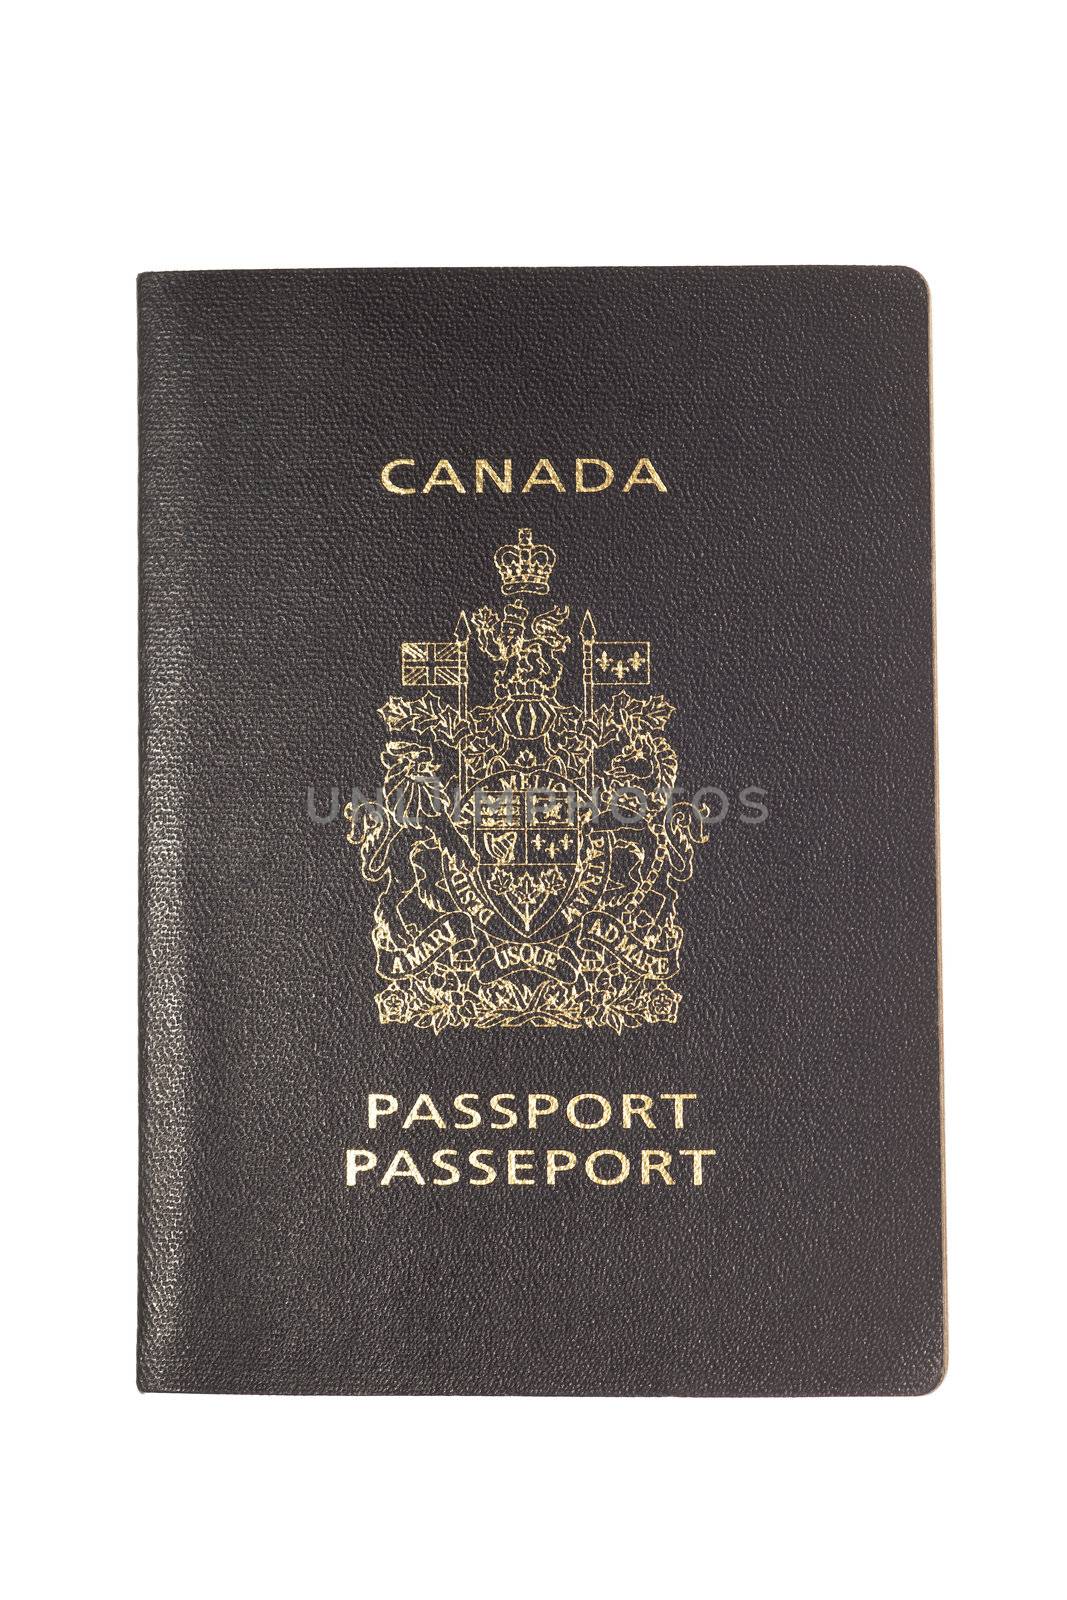 Canadian passport being isolated on white background.